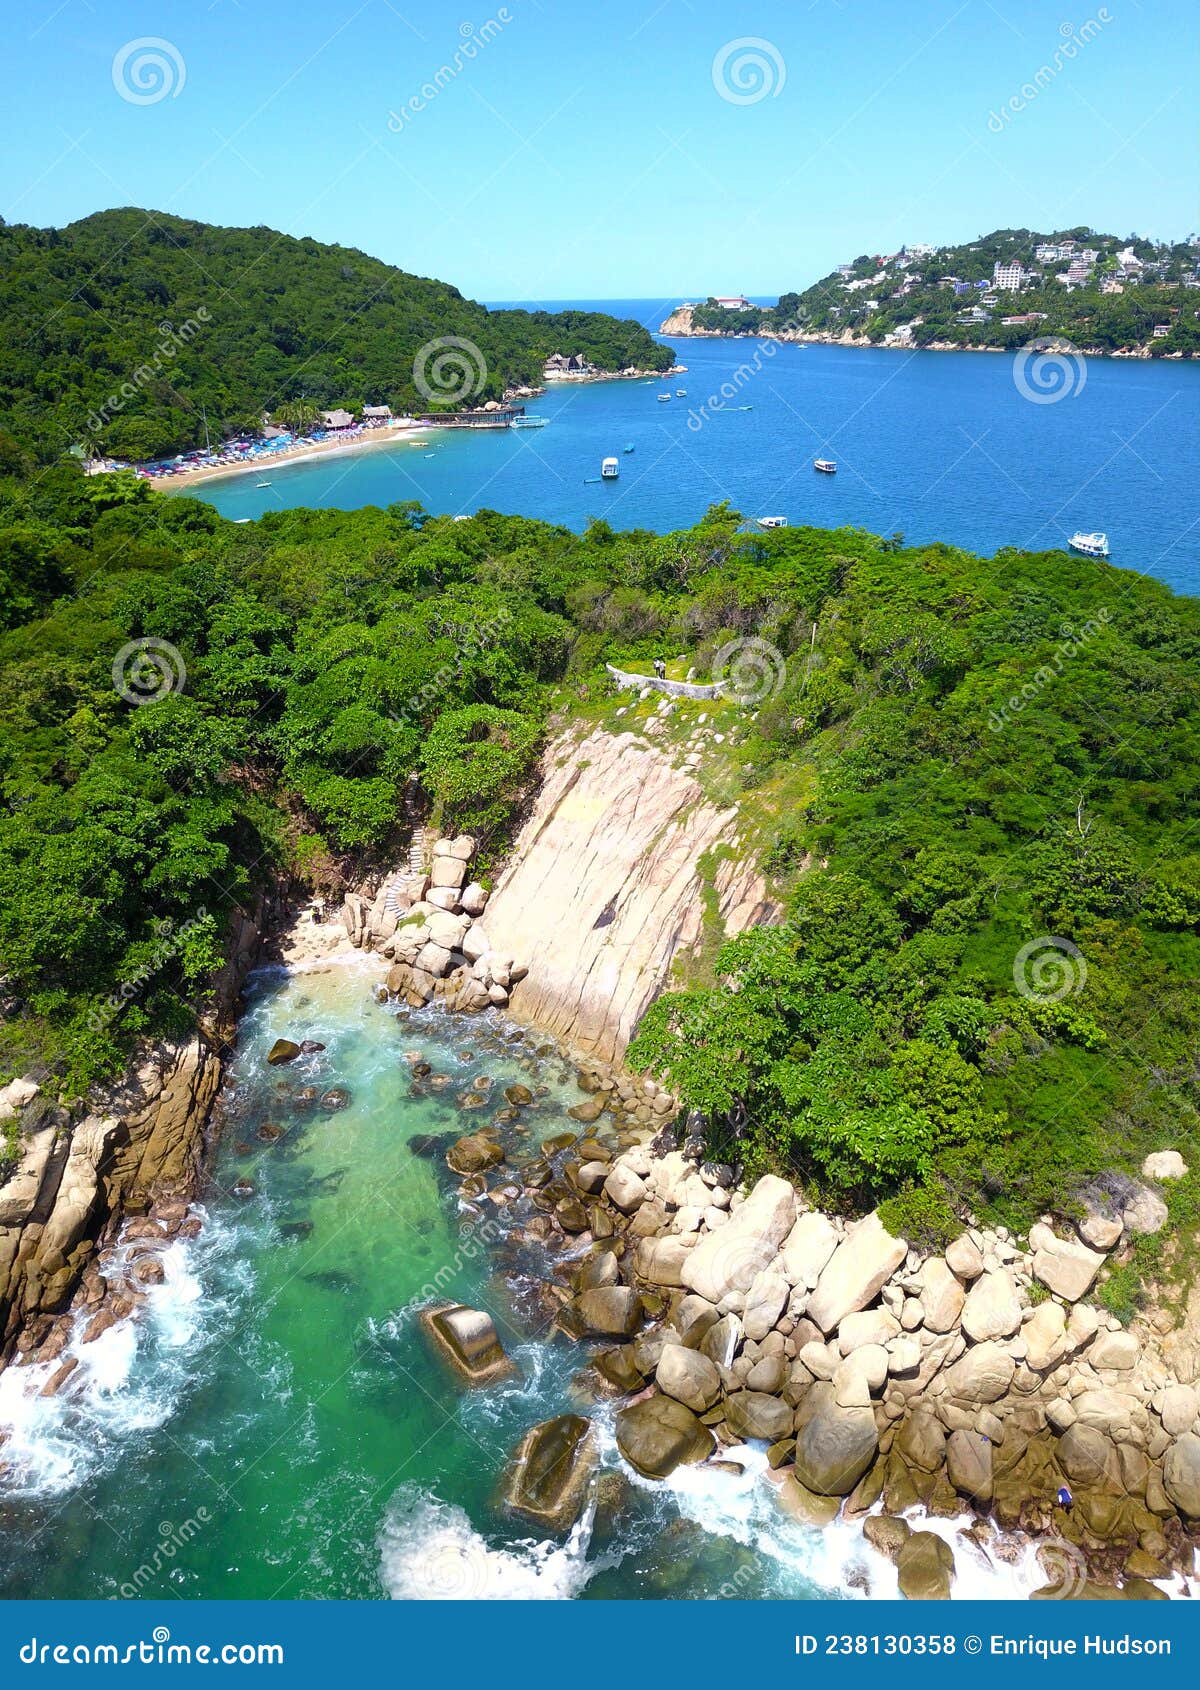 aerial vertical view of the beach of love in roqueta island